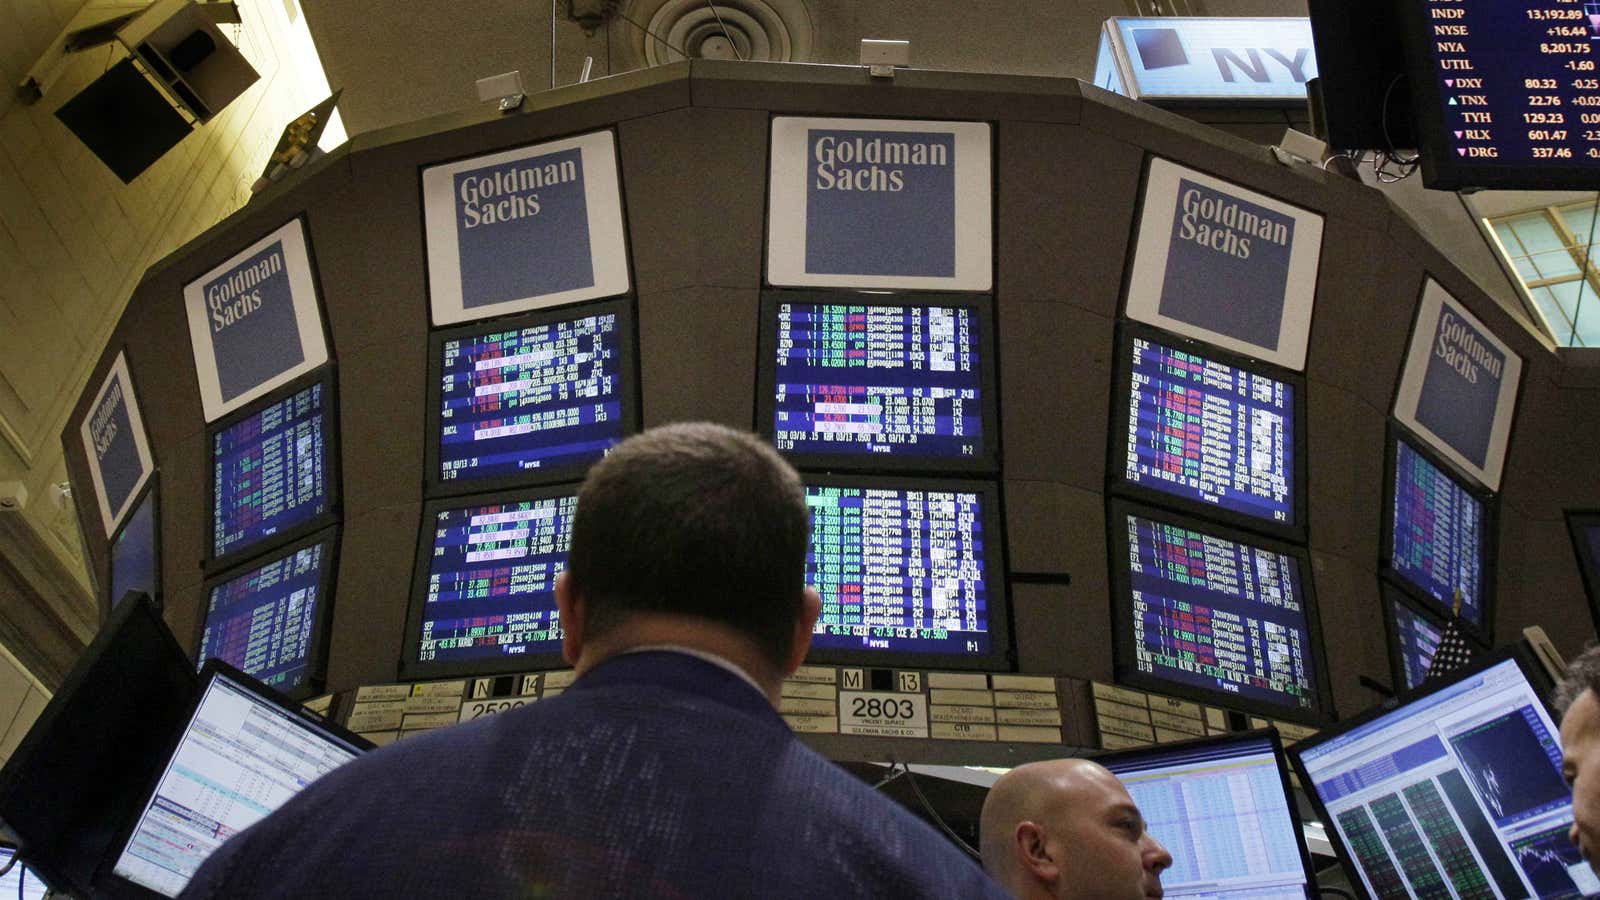 Traders work at the Goldman Sachs posts on the floor of the New York Stock Exchange Thursday, March 15, 2012.